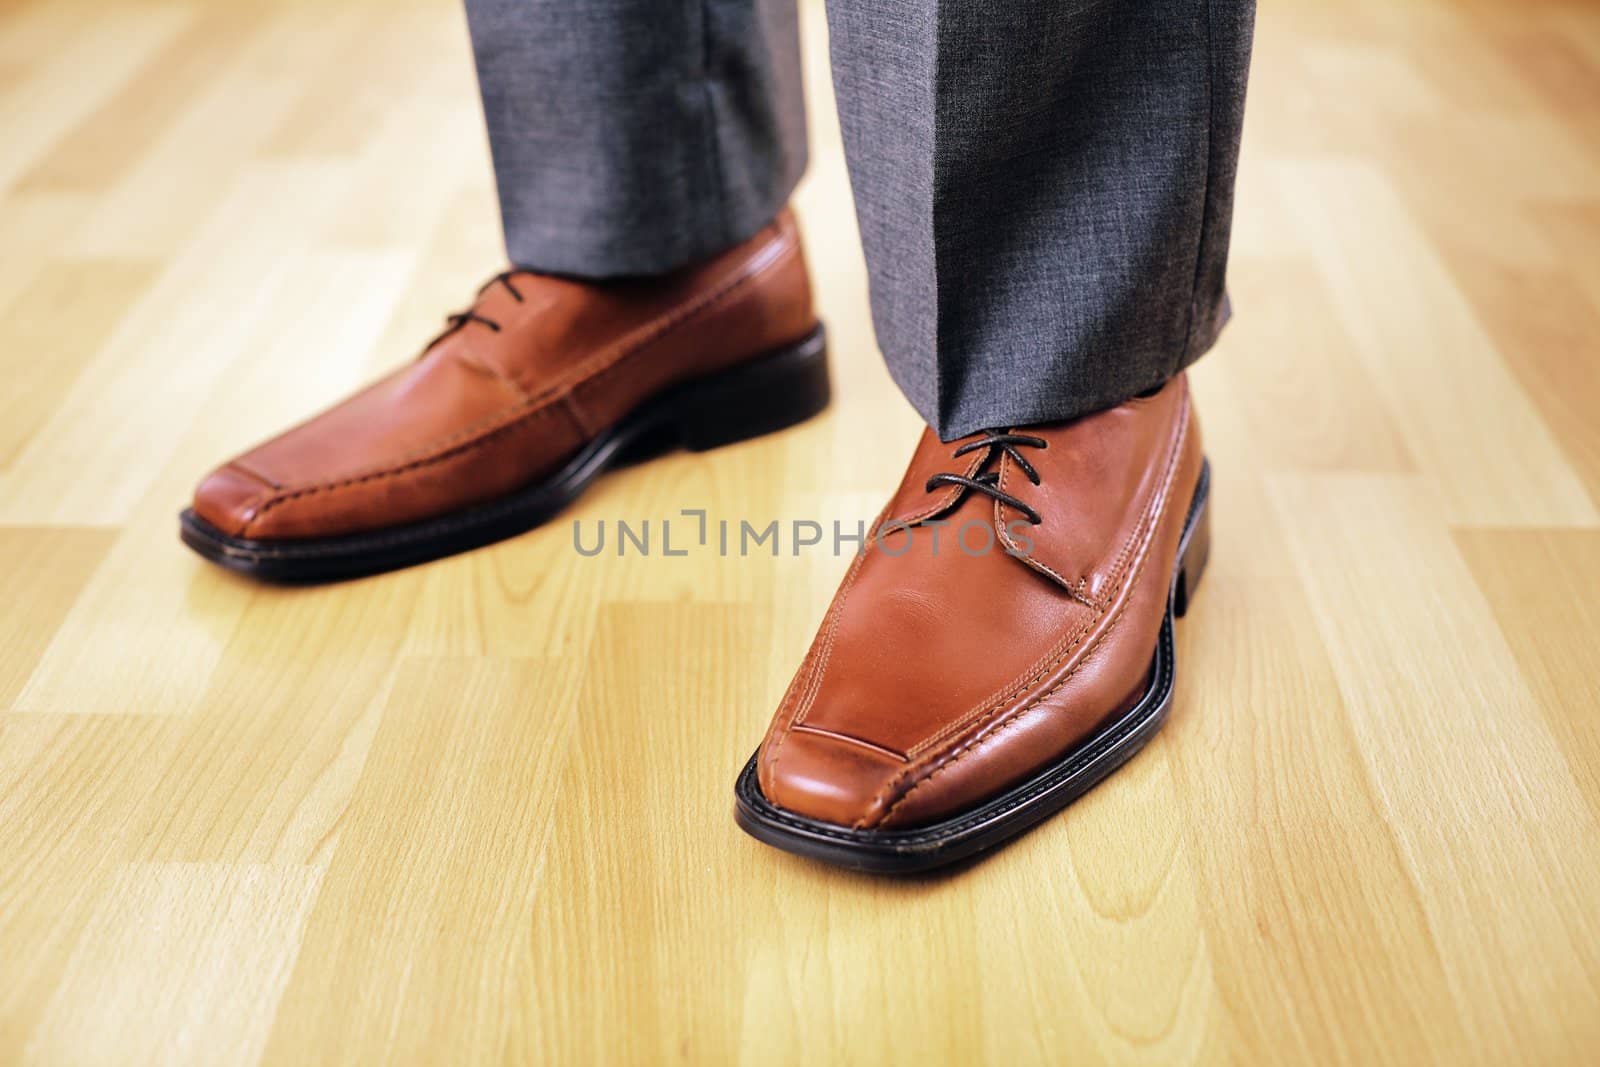 Feet with brown leather shoes. short depth-of-field.